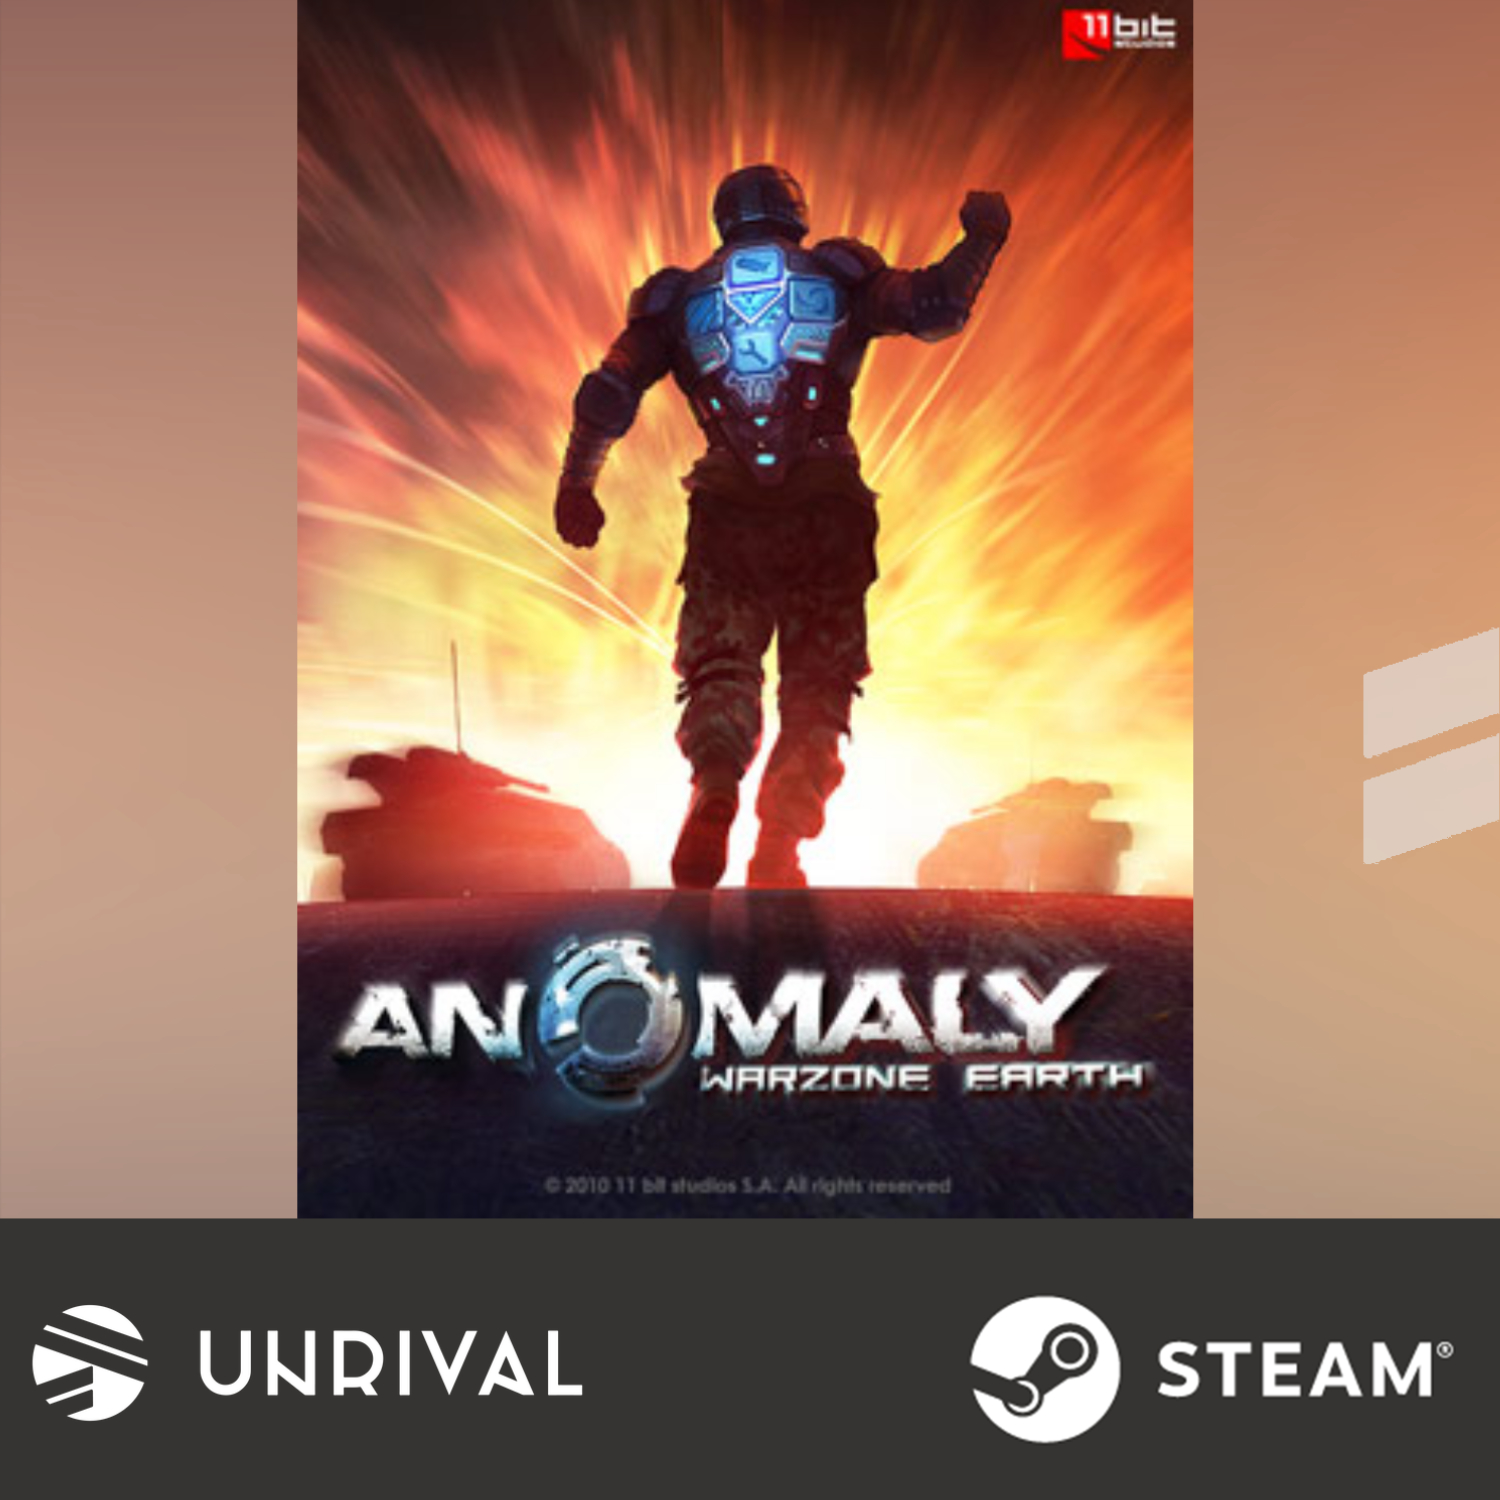 [Hot Sale] Anomaly: Warzone Earth PC Digital Download Game (Single Player) - Unrival